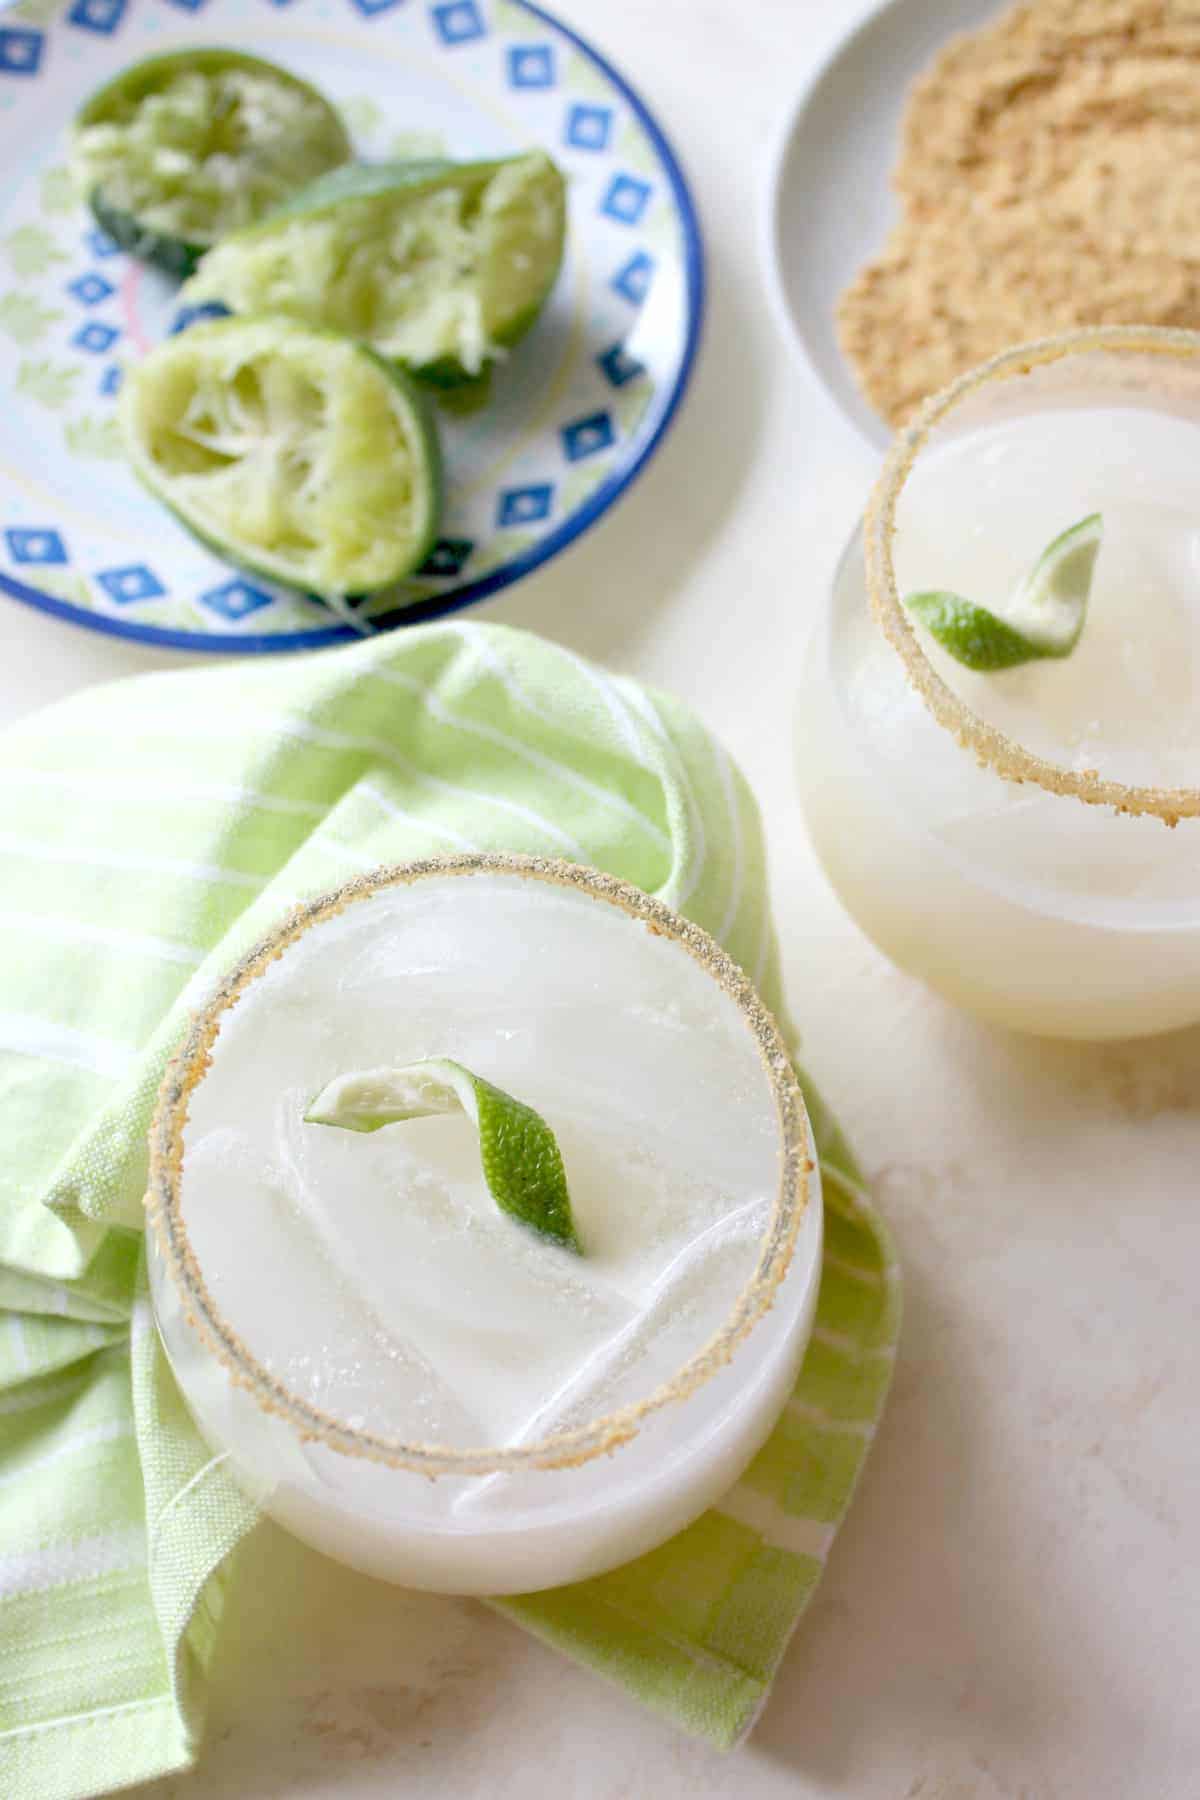 Coconut lime drinks in glasses with squeezed limes & green napkin beside them.